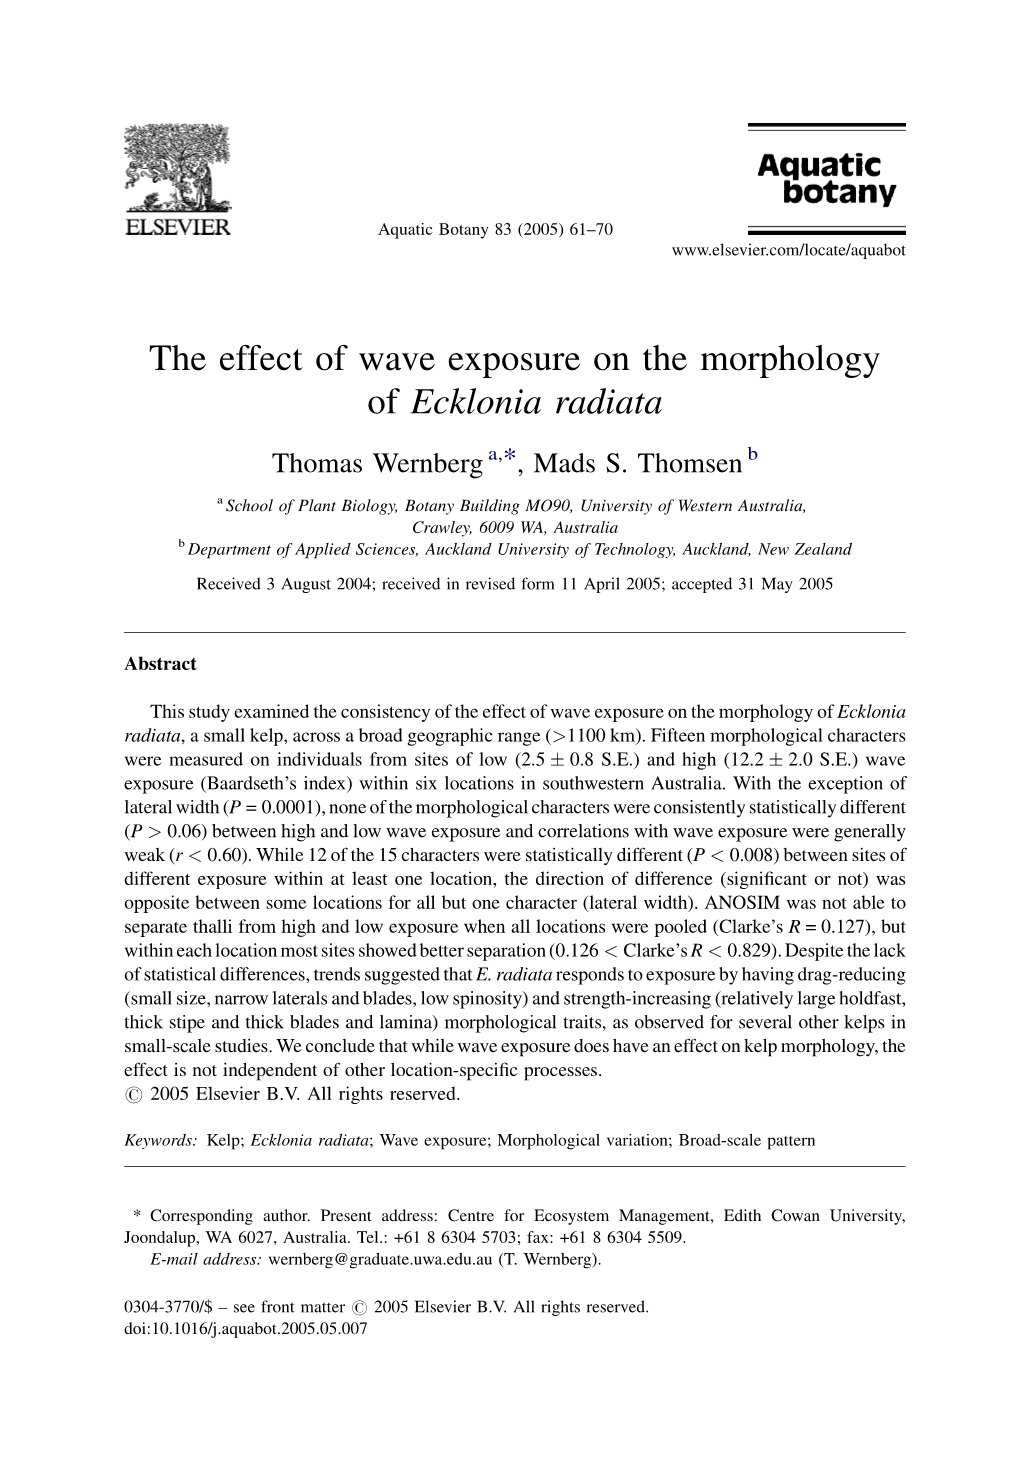 The Effect of Wave Exposure on the Morphology of Ecklonia Radiata